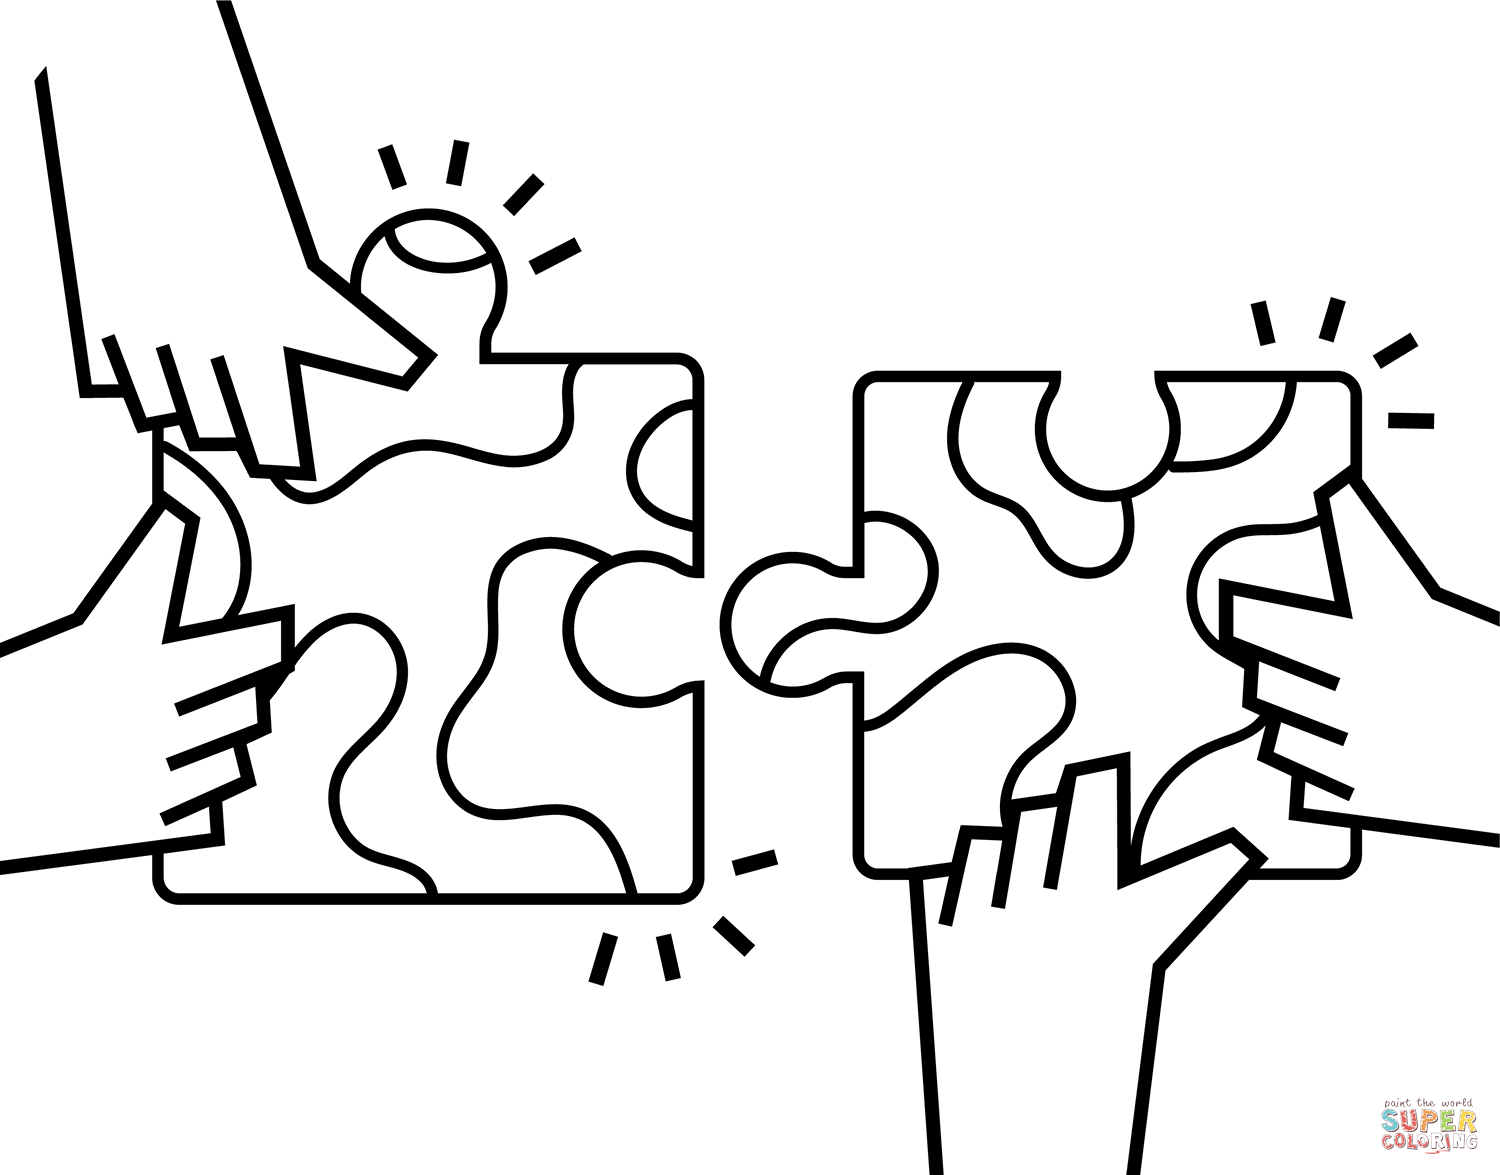 Collaboration coloring page free printable coloring pages